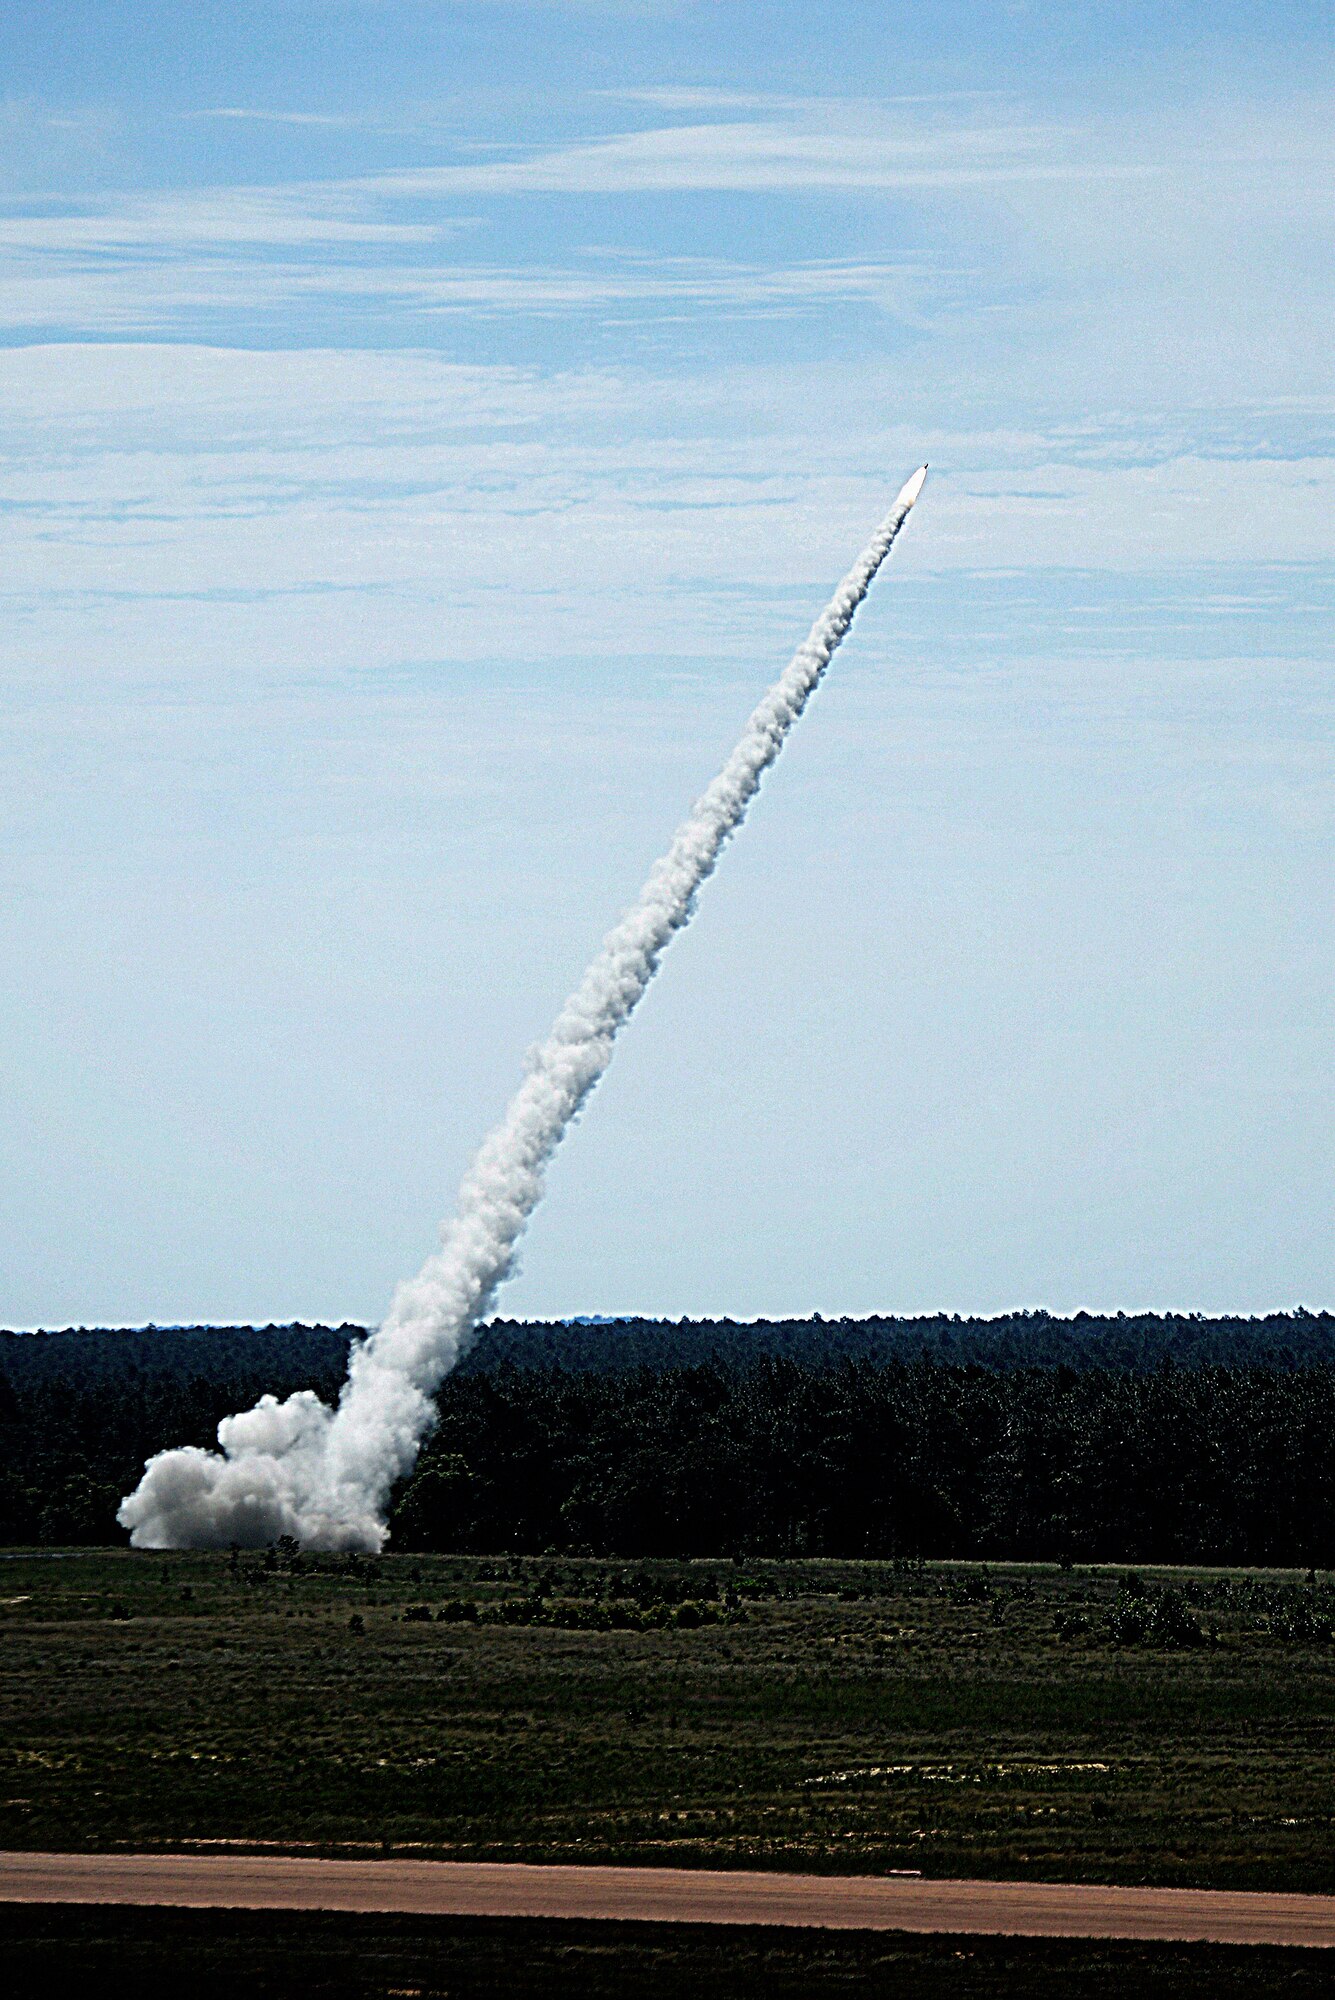 A High Mobility Artillery Rocket System launches a rocket at Ft. Bragg, North Carolina, June 25, 2019. The U.S. Army and Air Force have been conducting exercises that deliver HIMARS vehicles within a 186-mile range of the target, to fire and then rapidly extract, utilizing a C-17 Globemaster III.